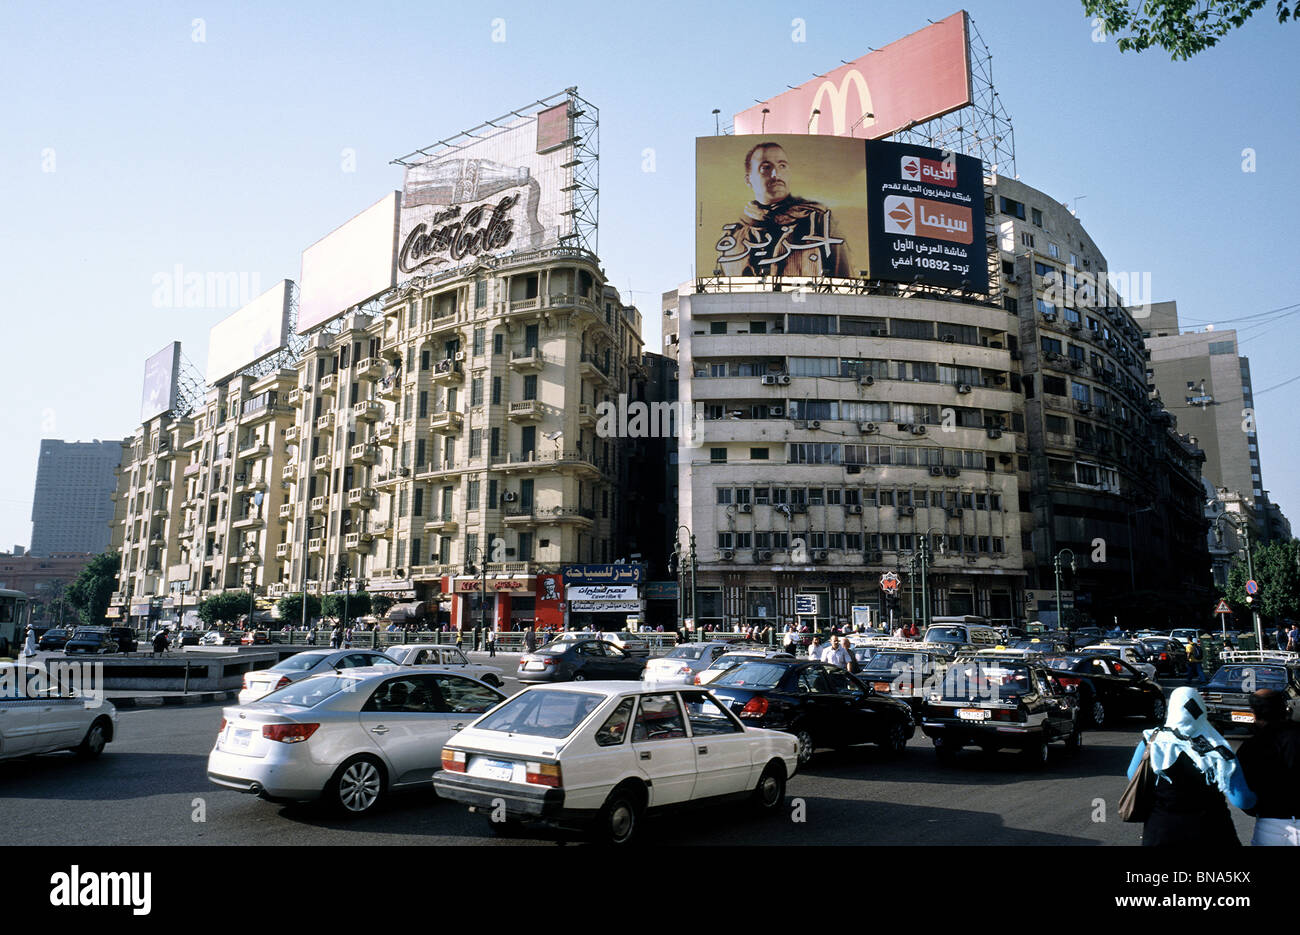 Rush hour traffic on Midan Tahrir (Liberation Square) in central Cairo. Stock Photo